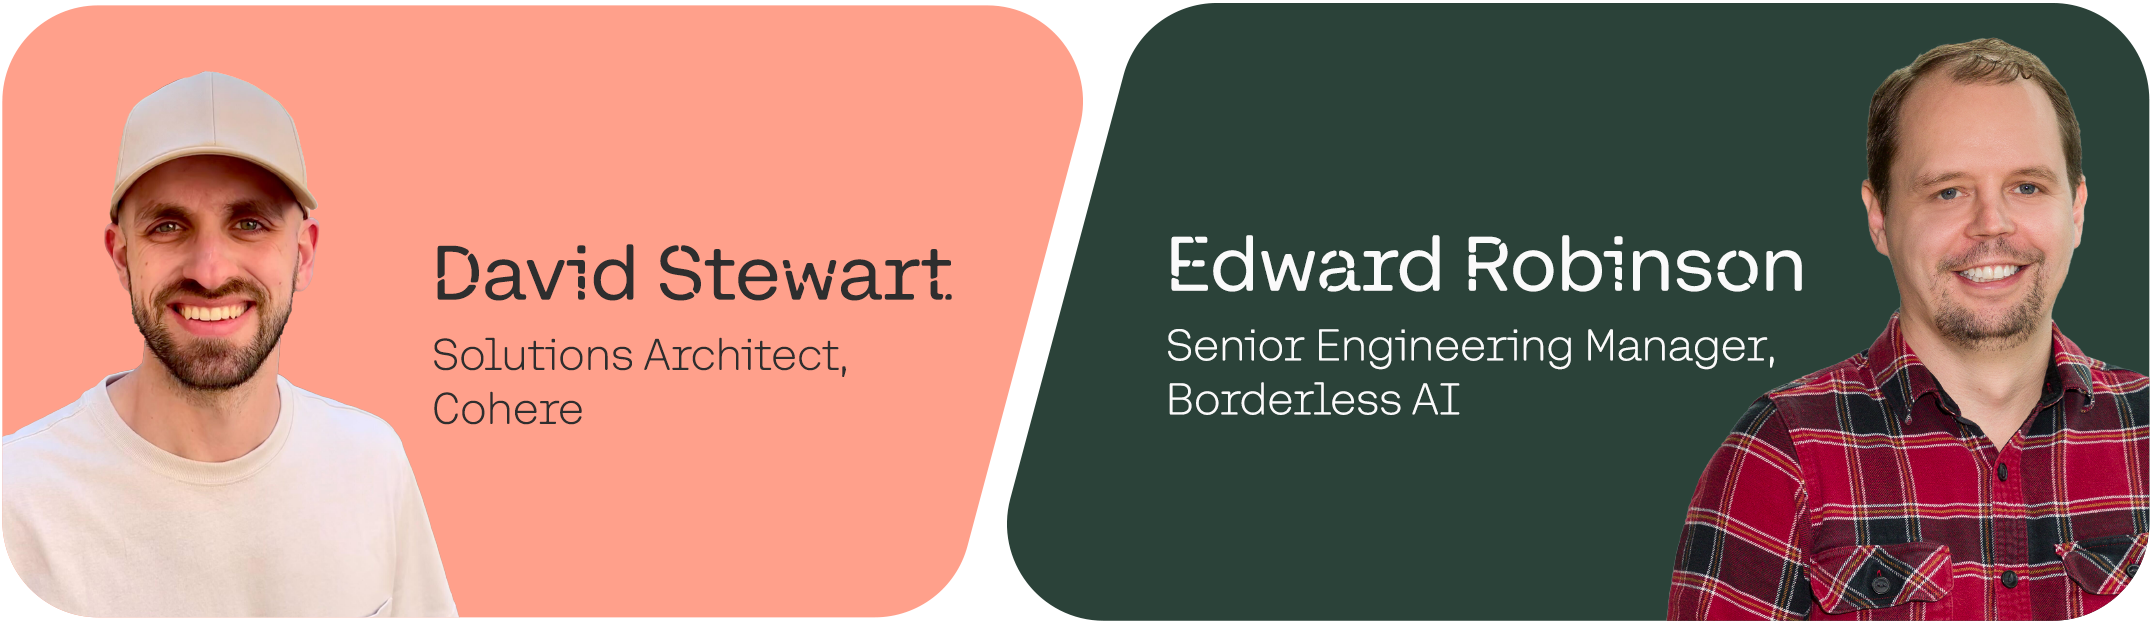 David Stewart, Solutions of Architect, Cohere and Edward Robinson, Senior Engineer Manager, Borderless